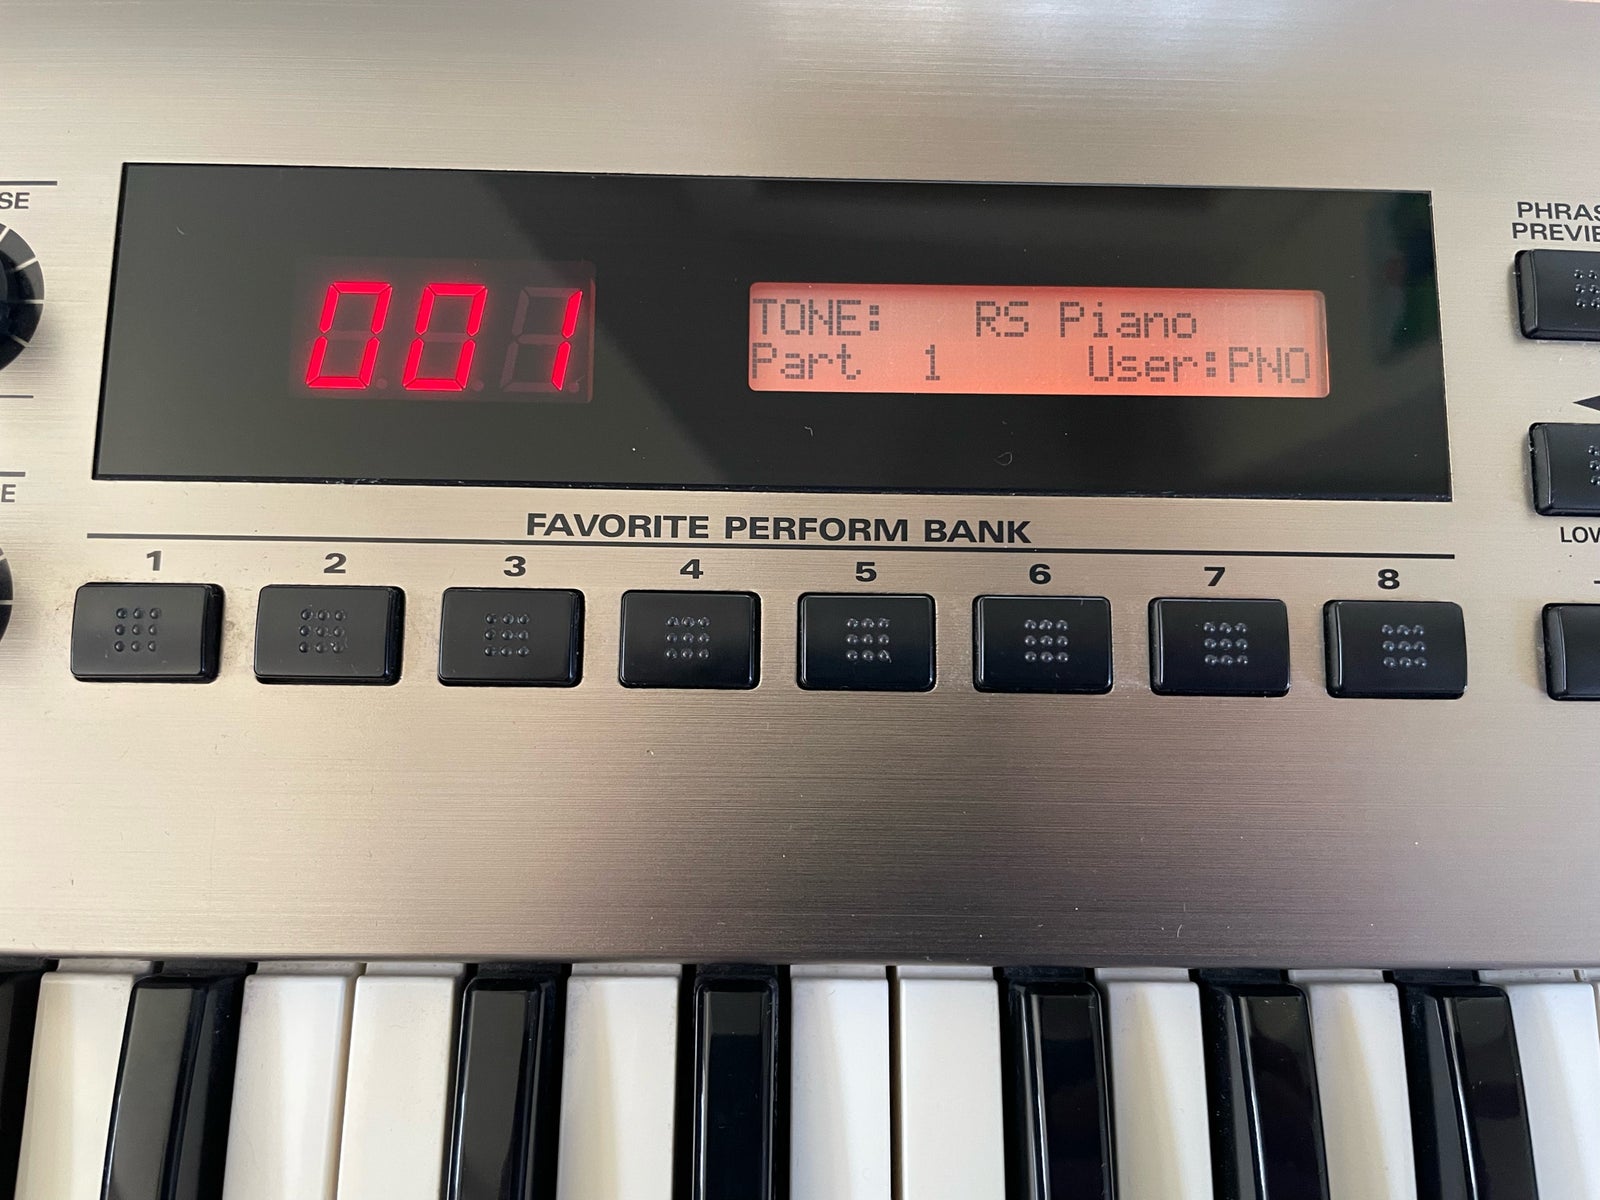 Synthesizer, Roland RS-5